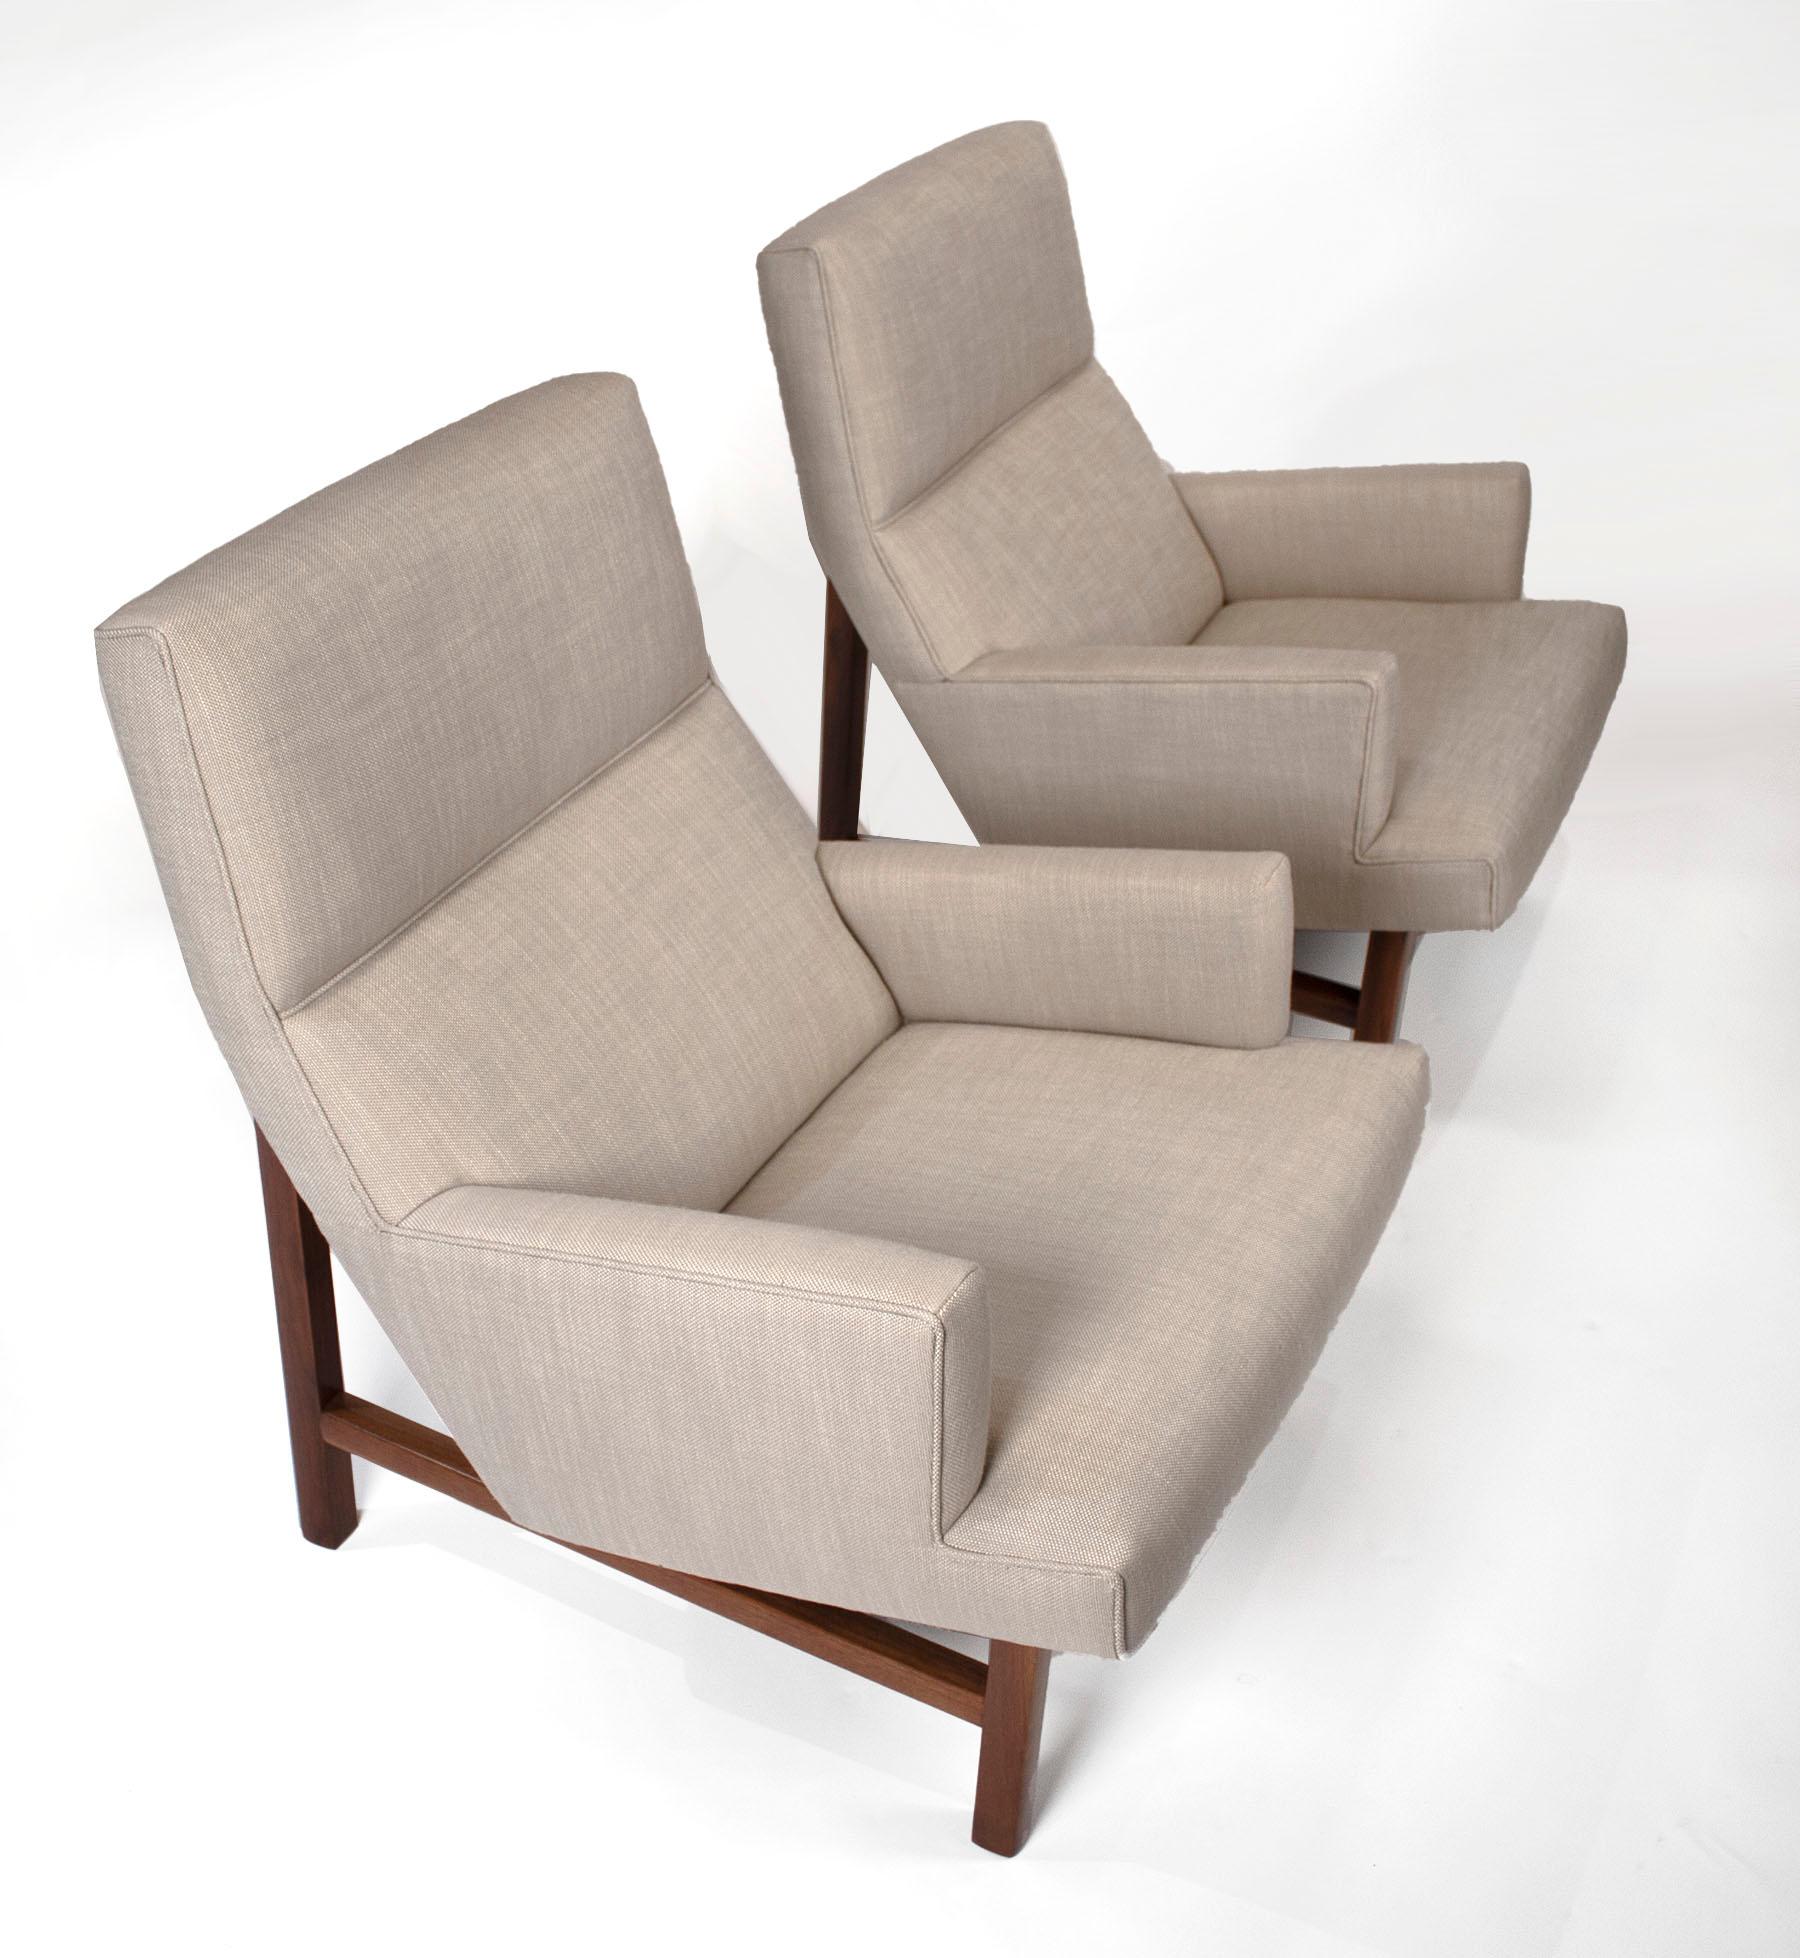 Mid-Century Modern Jen Risom Floating Lounge Chairs in Walnut Cradle Frames with Linen Upholstery